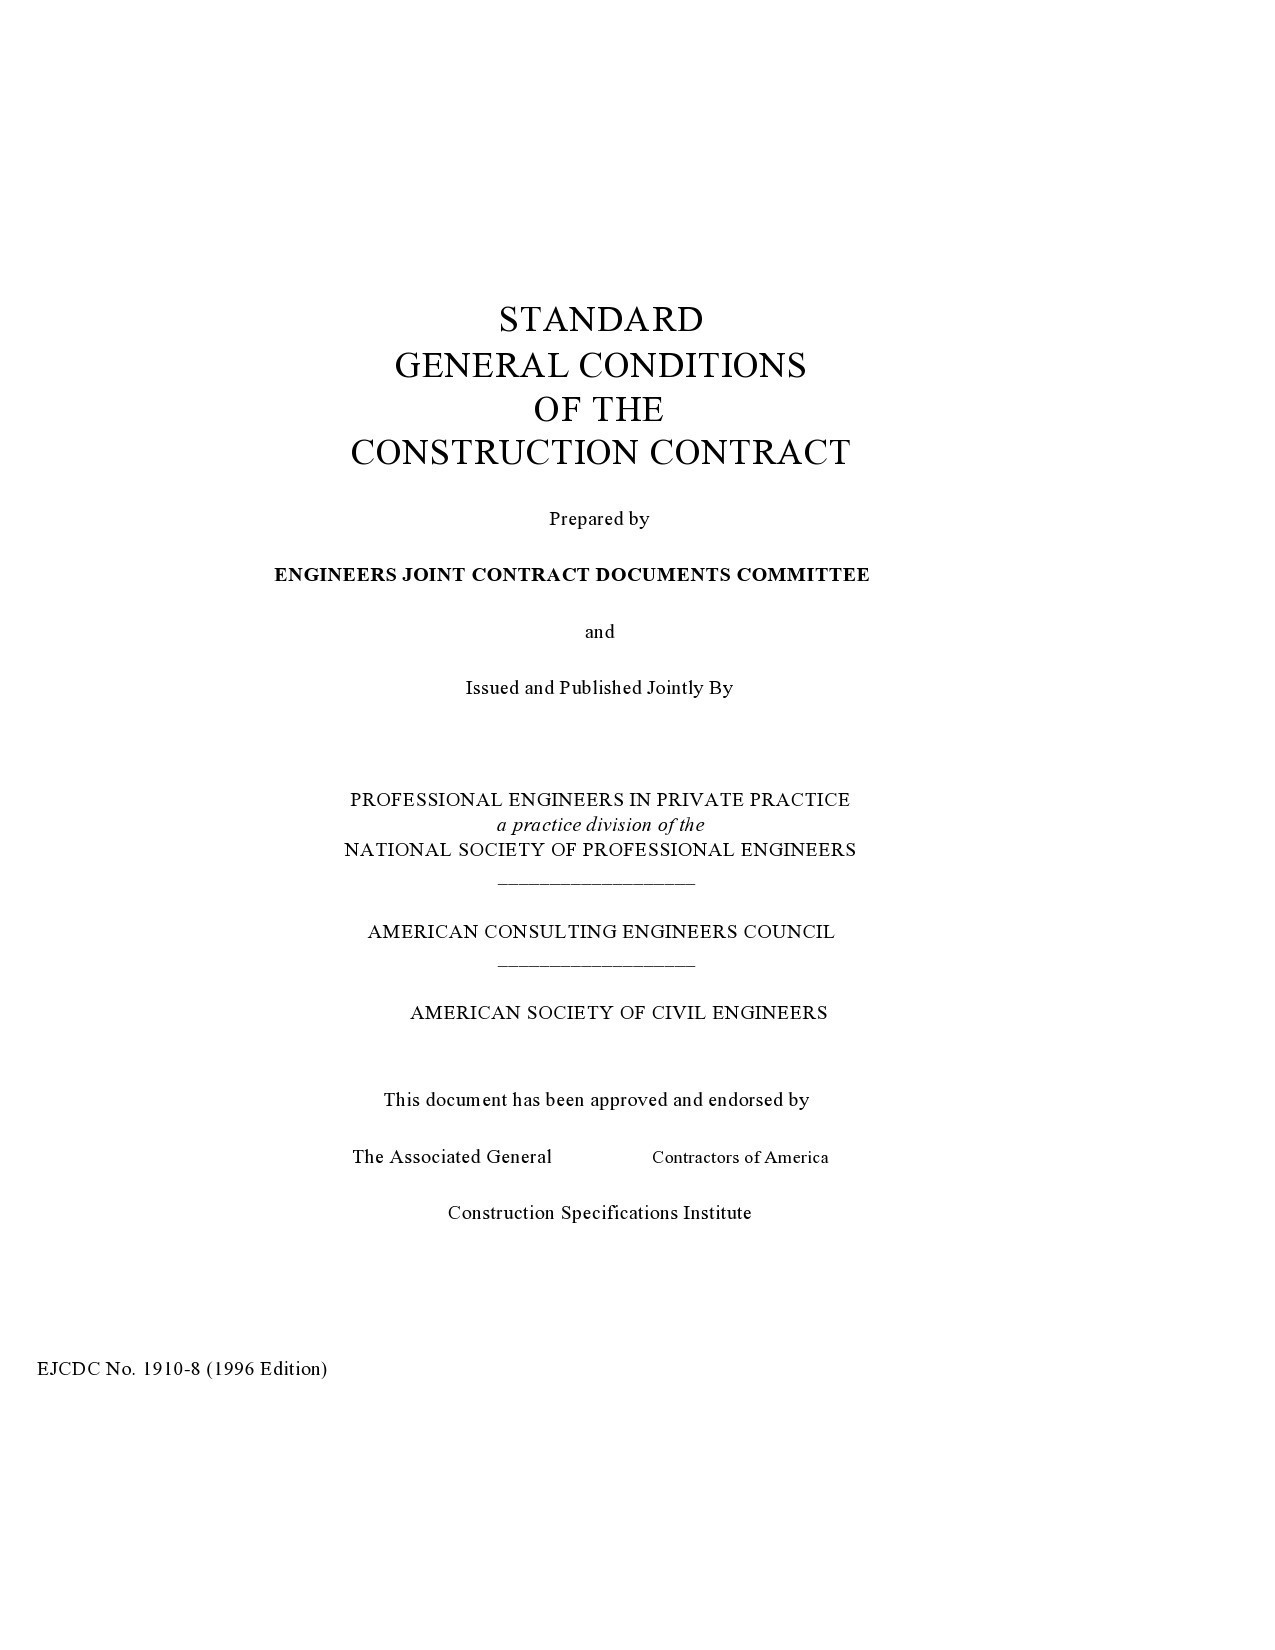 Free construction contract agreement 22